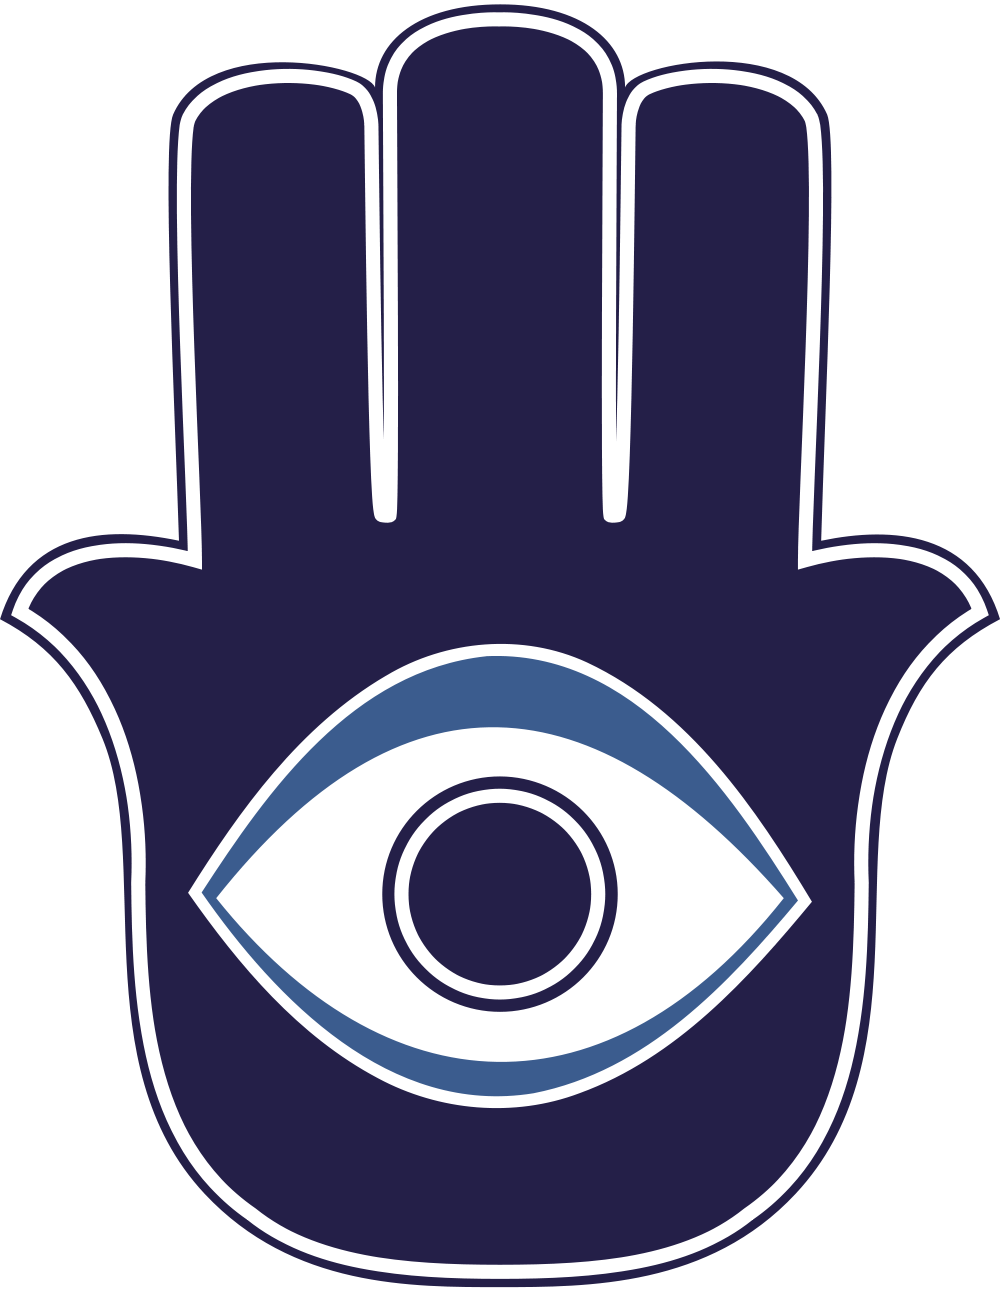 A Blue And White Hand With A Eye And A White Line